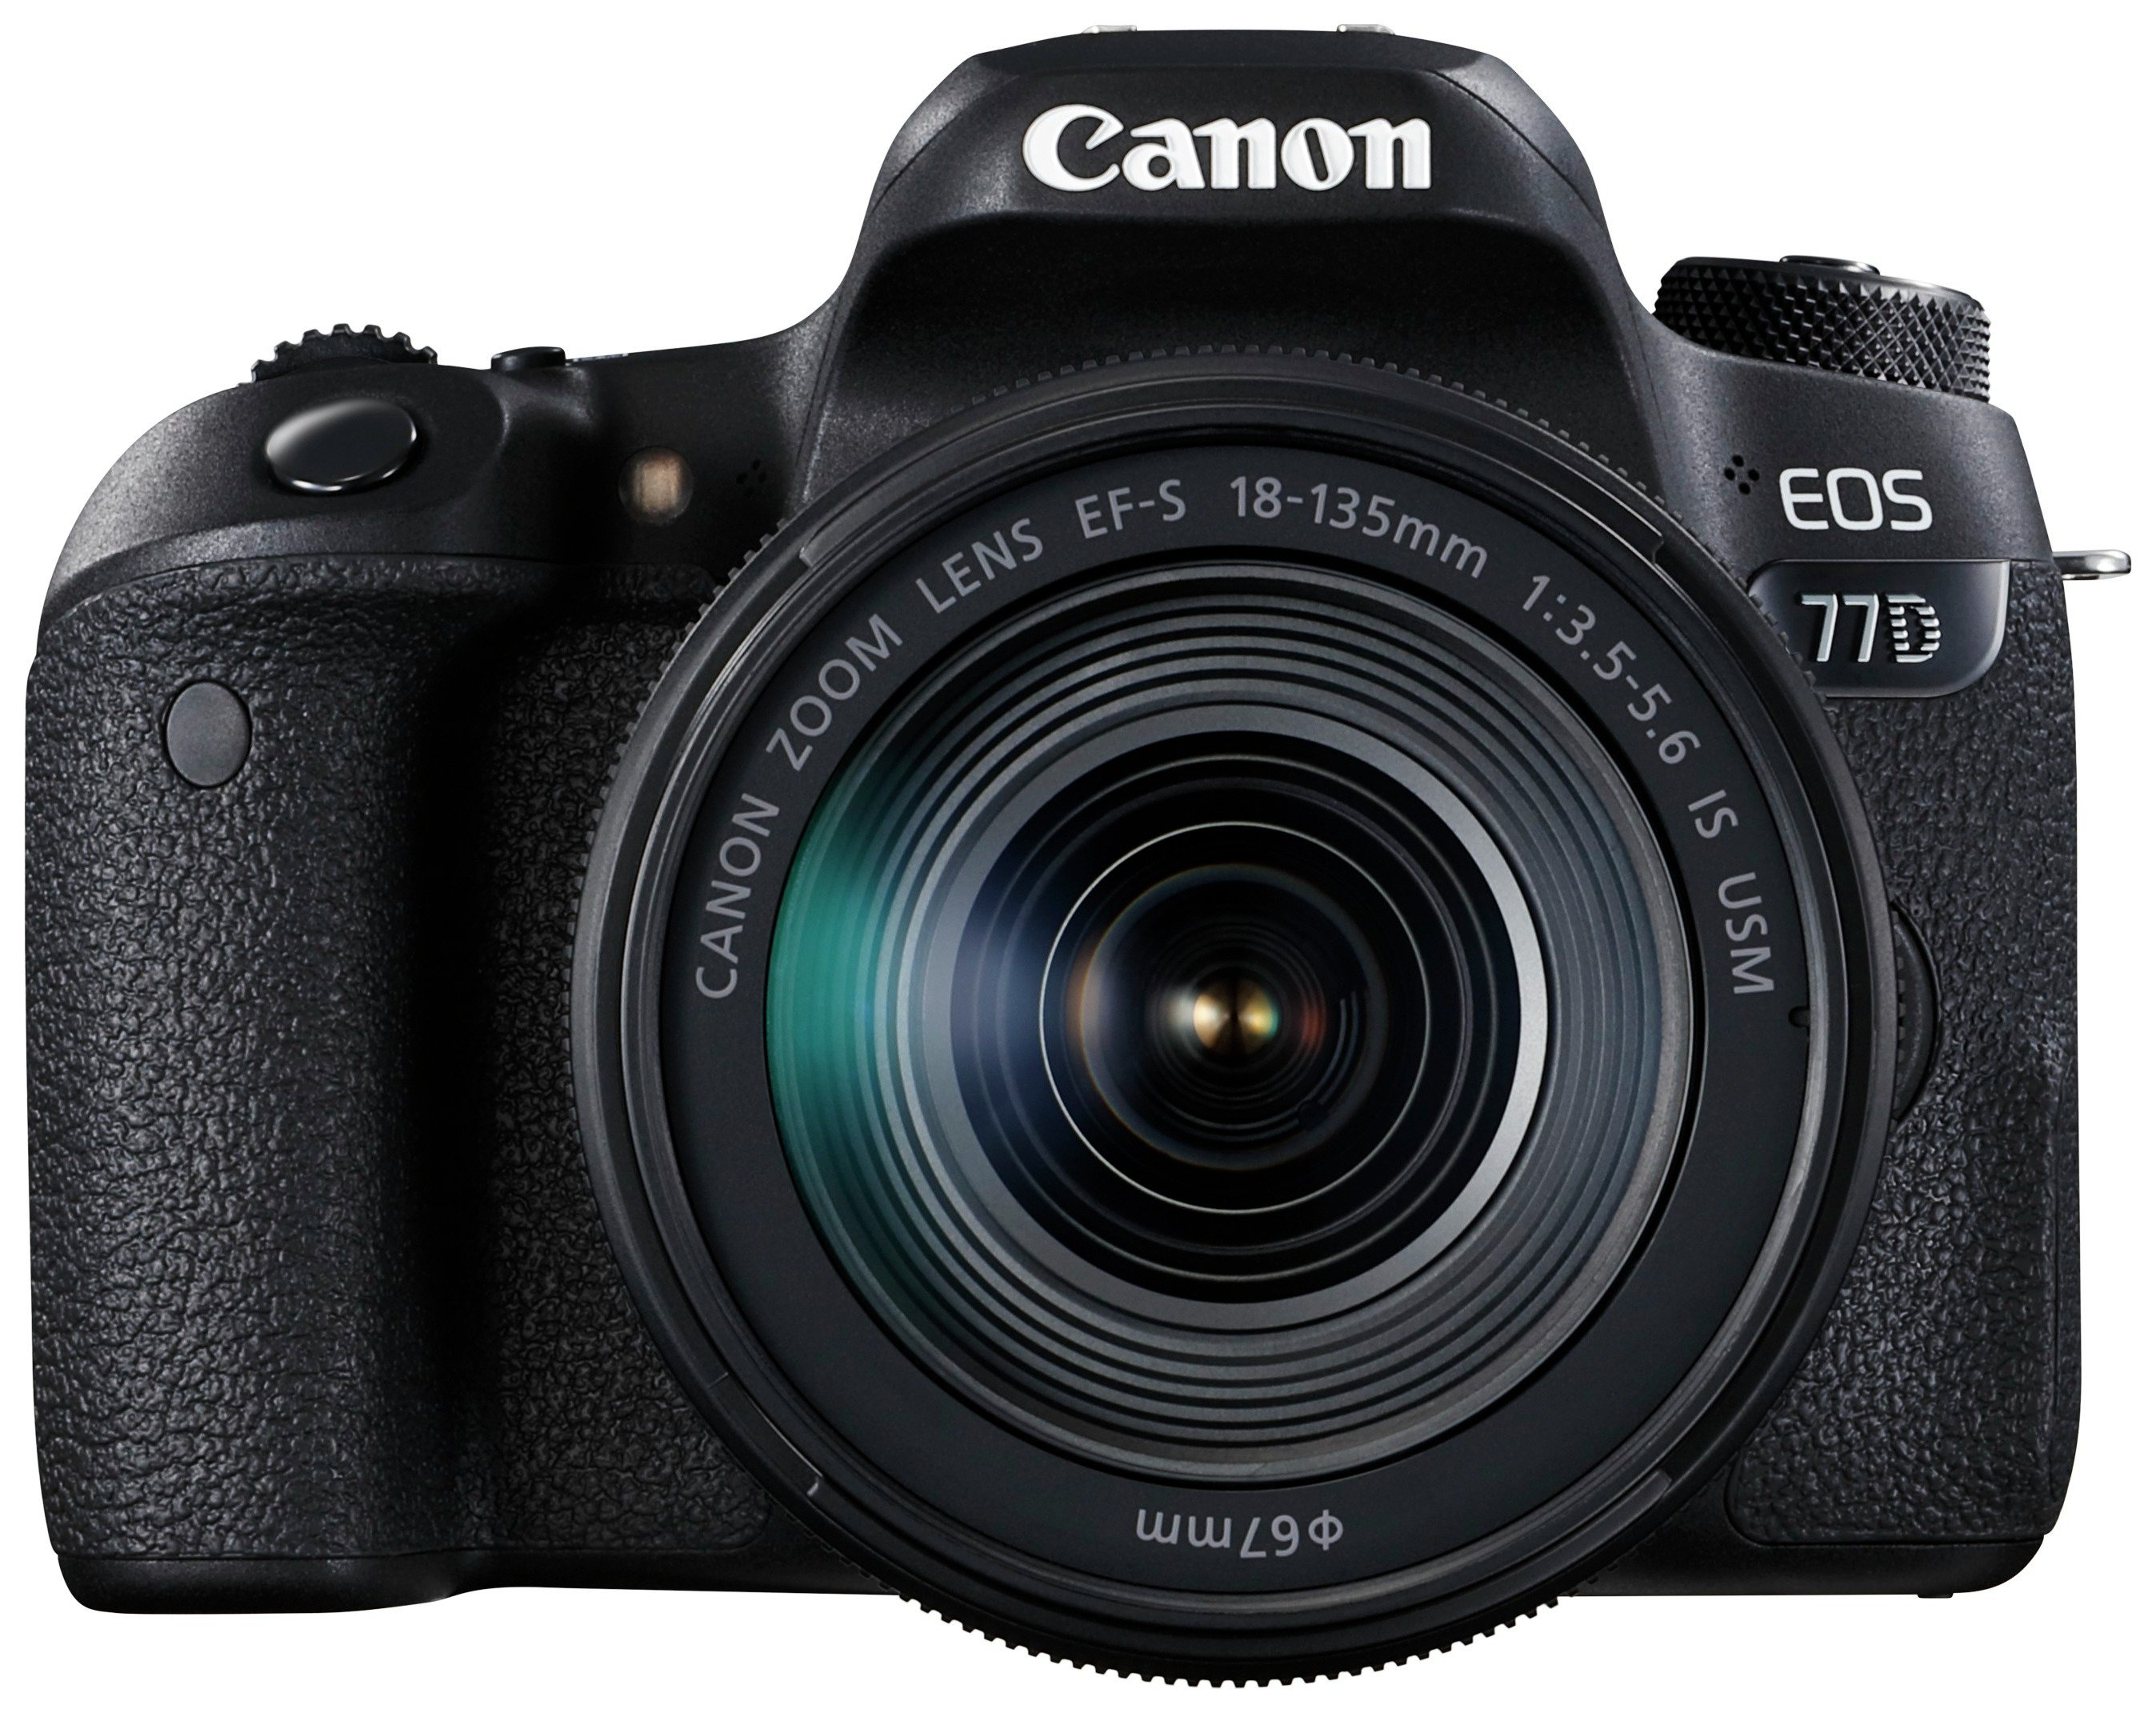 Canon EOS 77D DSLR Camera with 18-135mm IS USM Lens